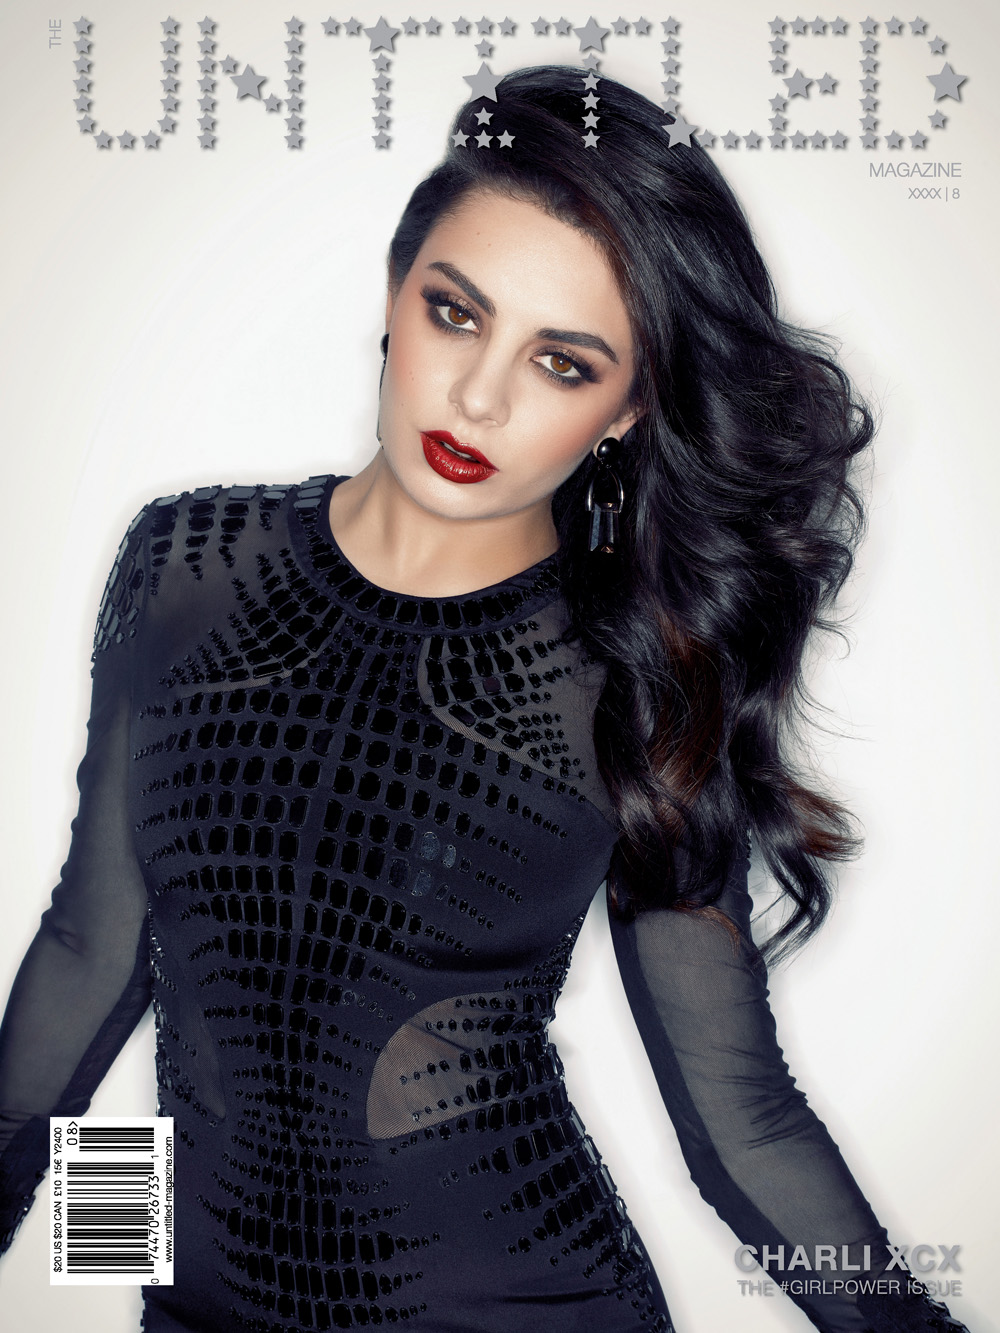 The-Untitled-Magazine-Issue-8-Charli-XCX-Cover-LR.jpg